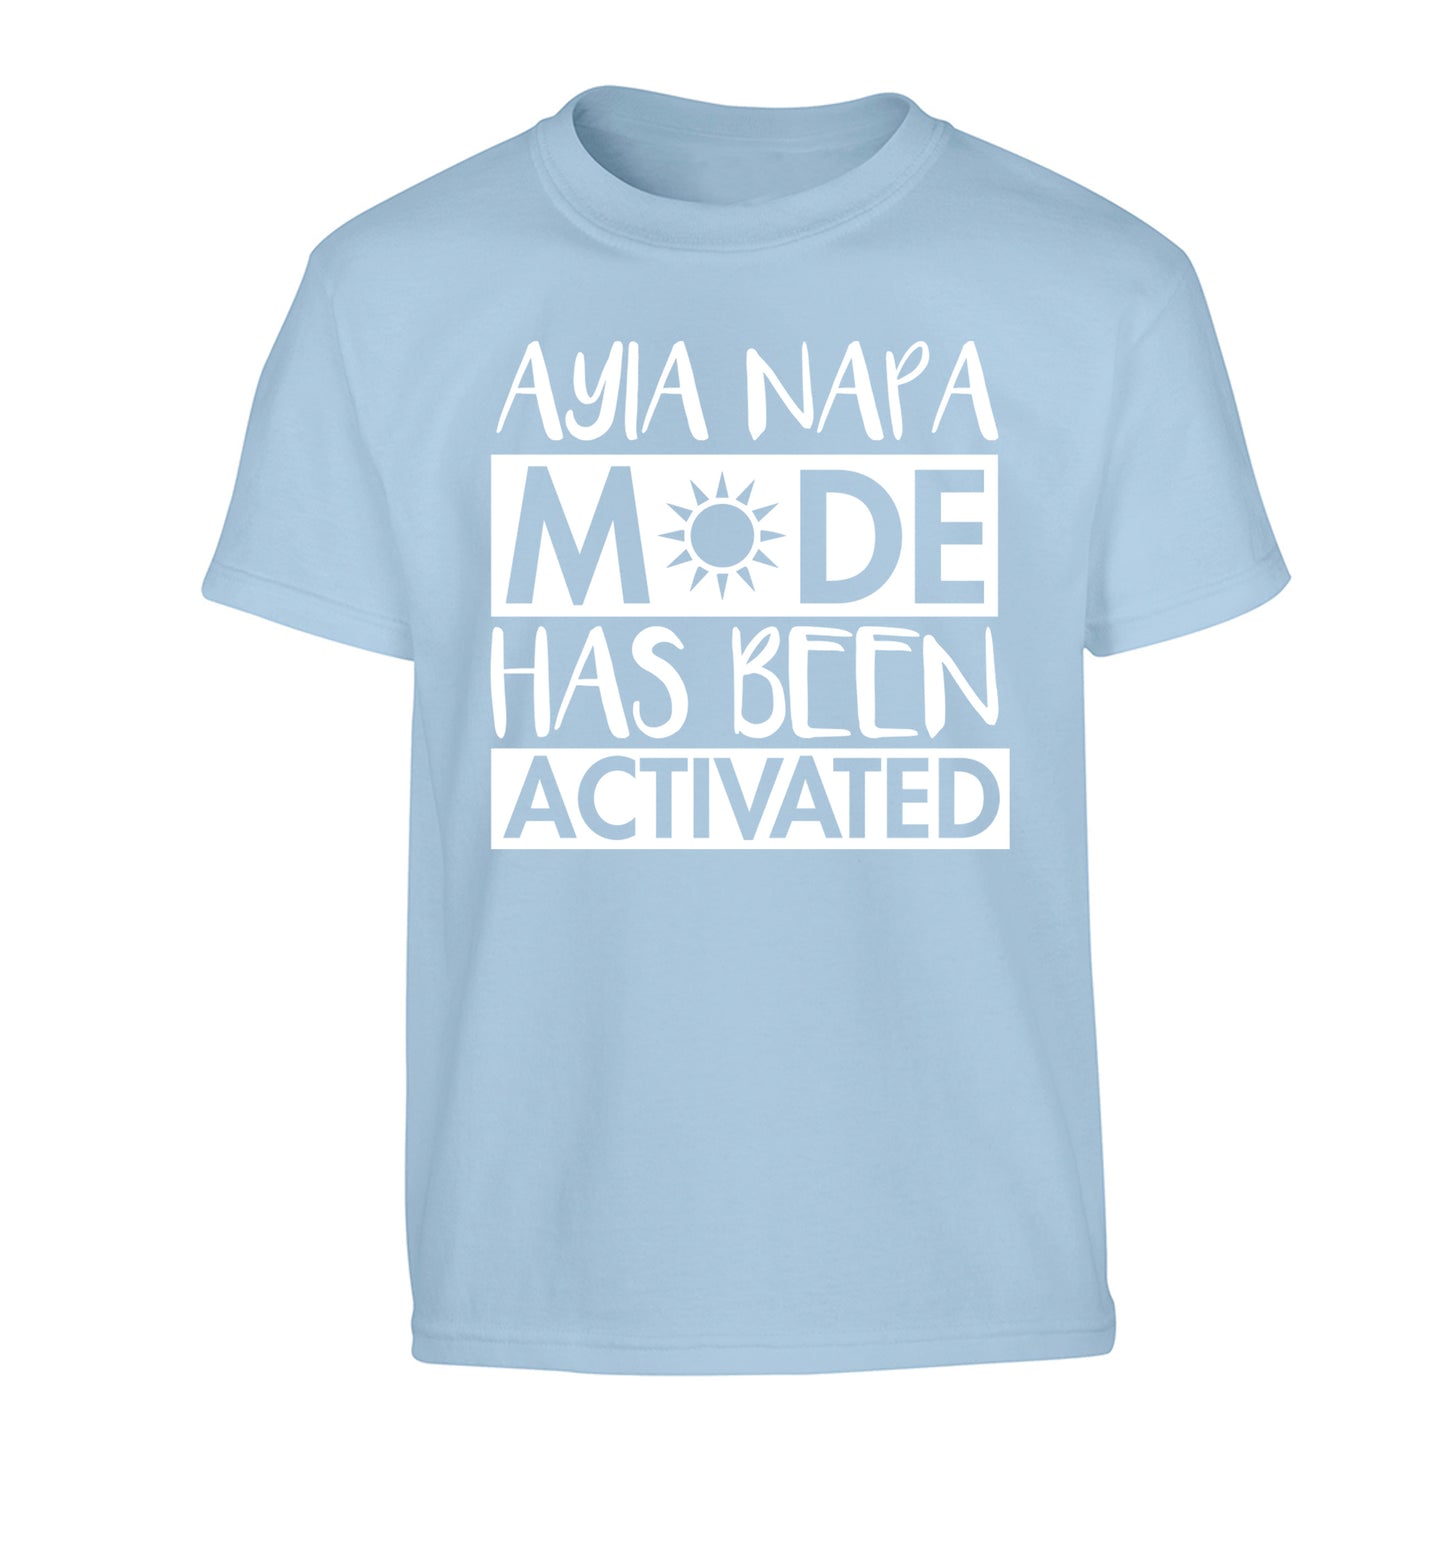 Ayia Napa mode has been activated Children's light blue Tshirt 12-13 Years